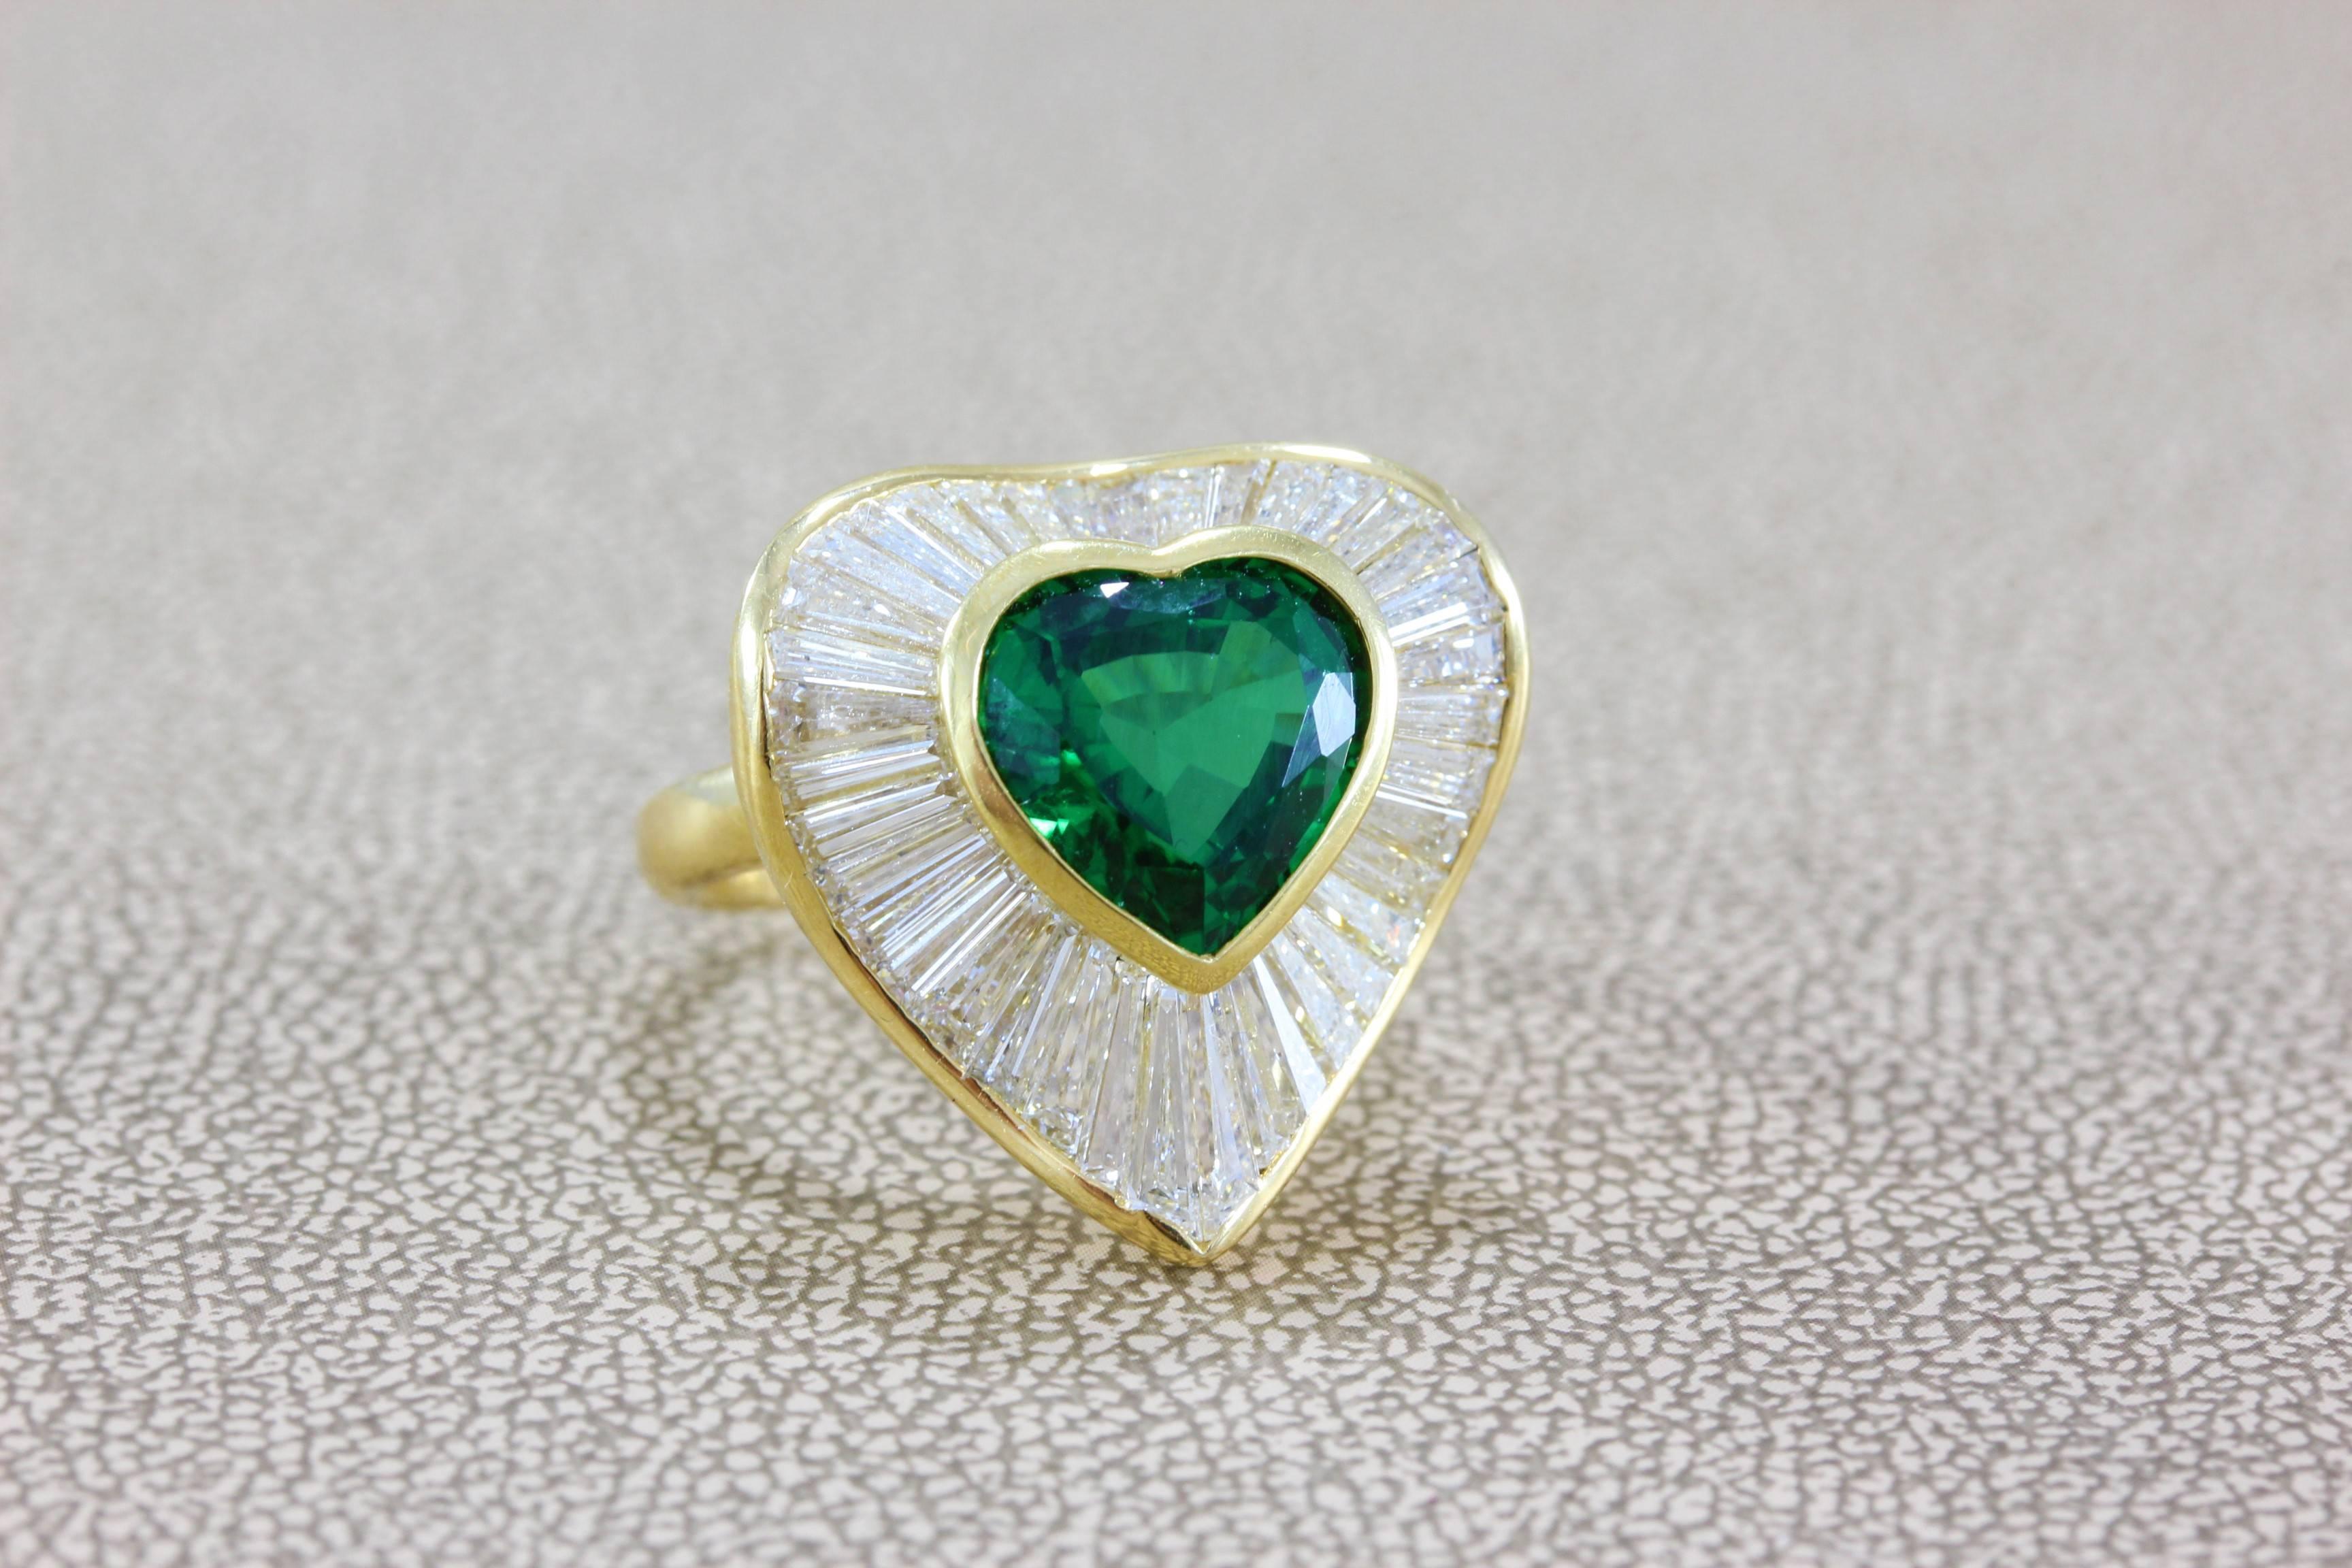 A rare and exquisite gemstone, chrome tourmaline is of the rarest varieties of tourmaline. Chrome tourmaline carry elements of chromium and vanadium which create a rich deeply saturated color to the gem separating it from traditional green